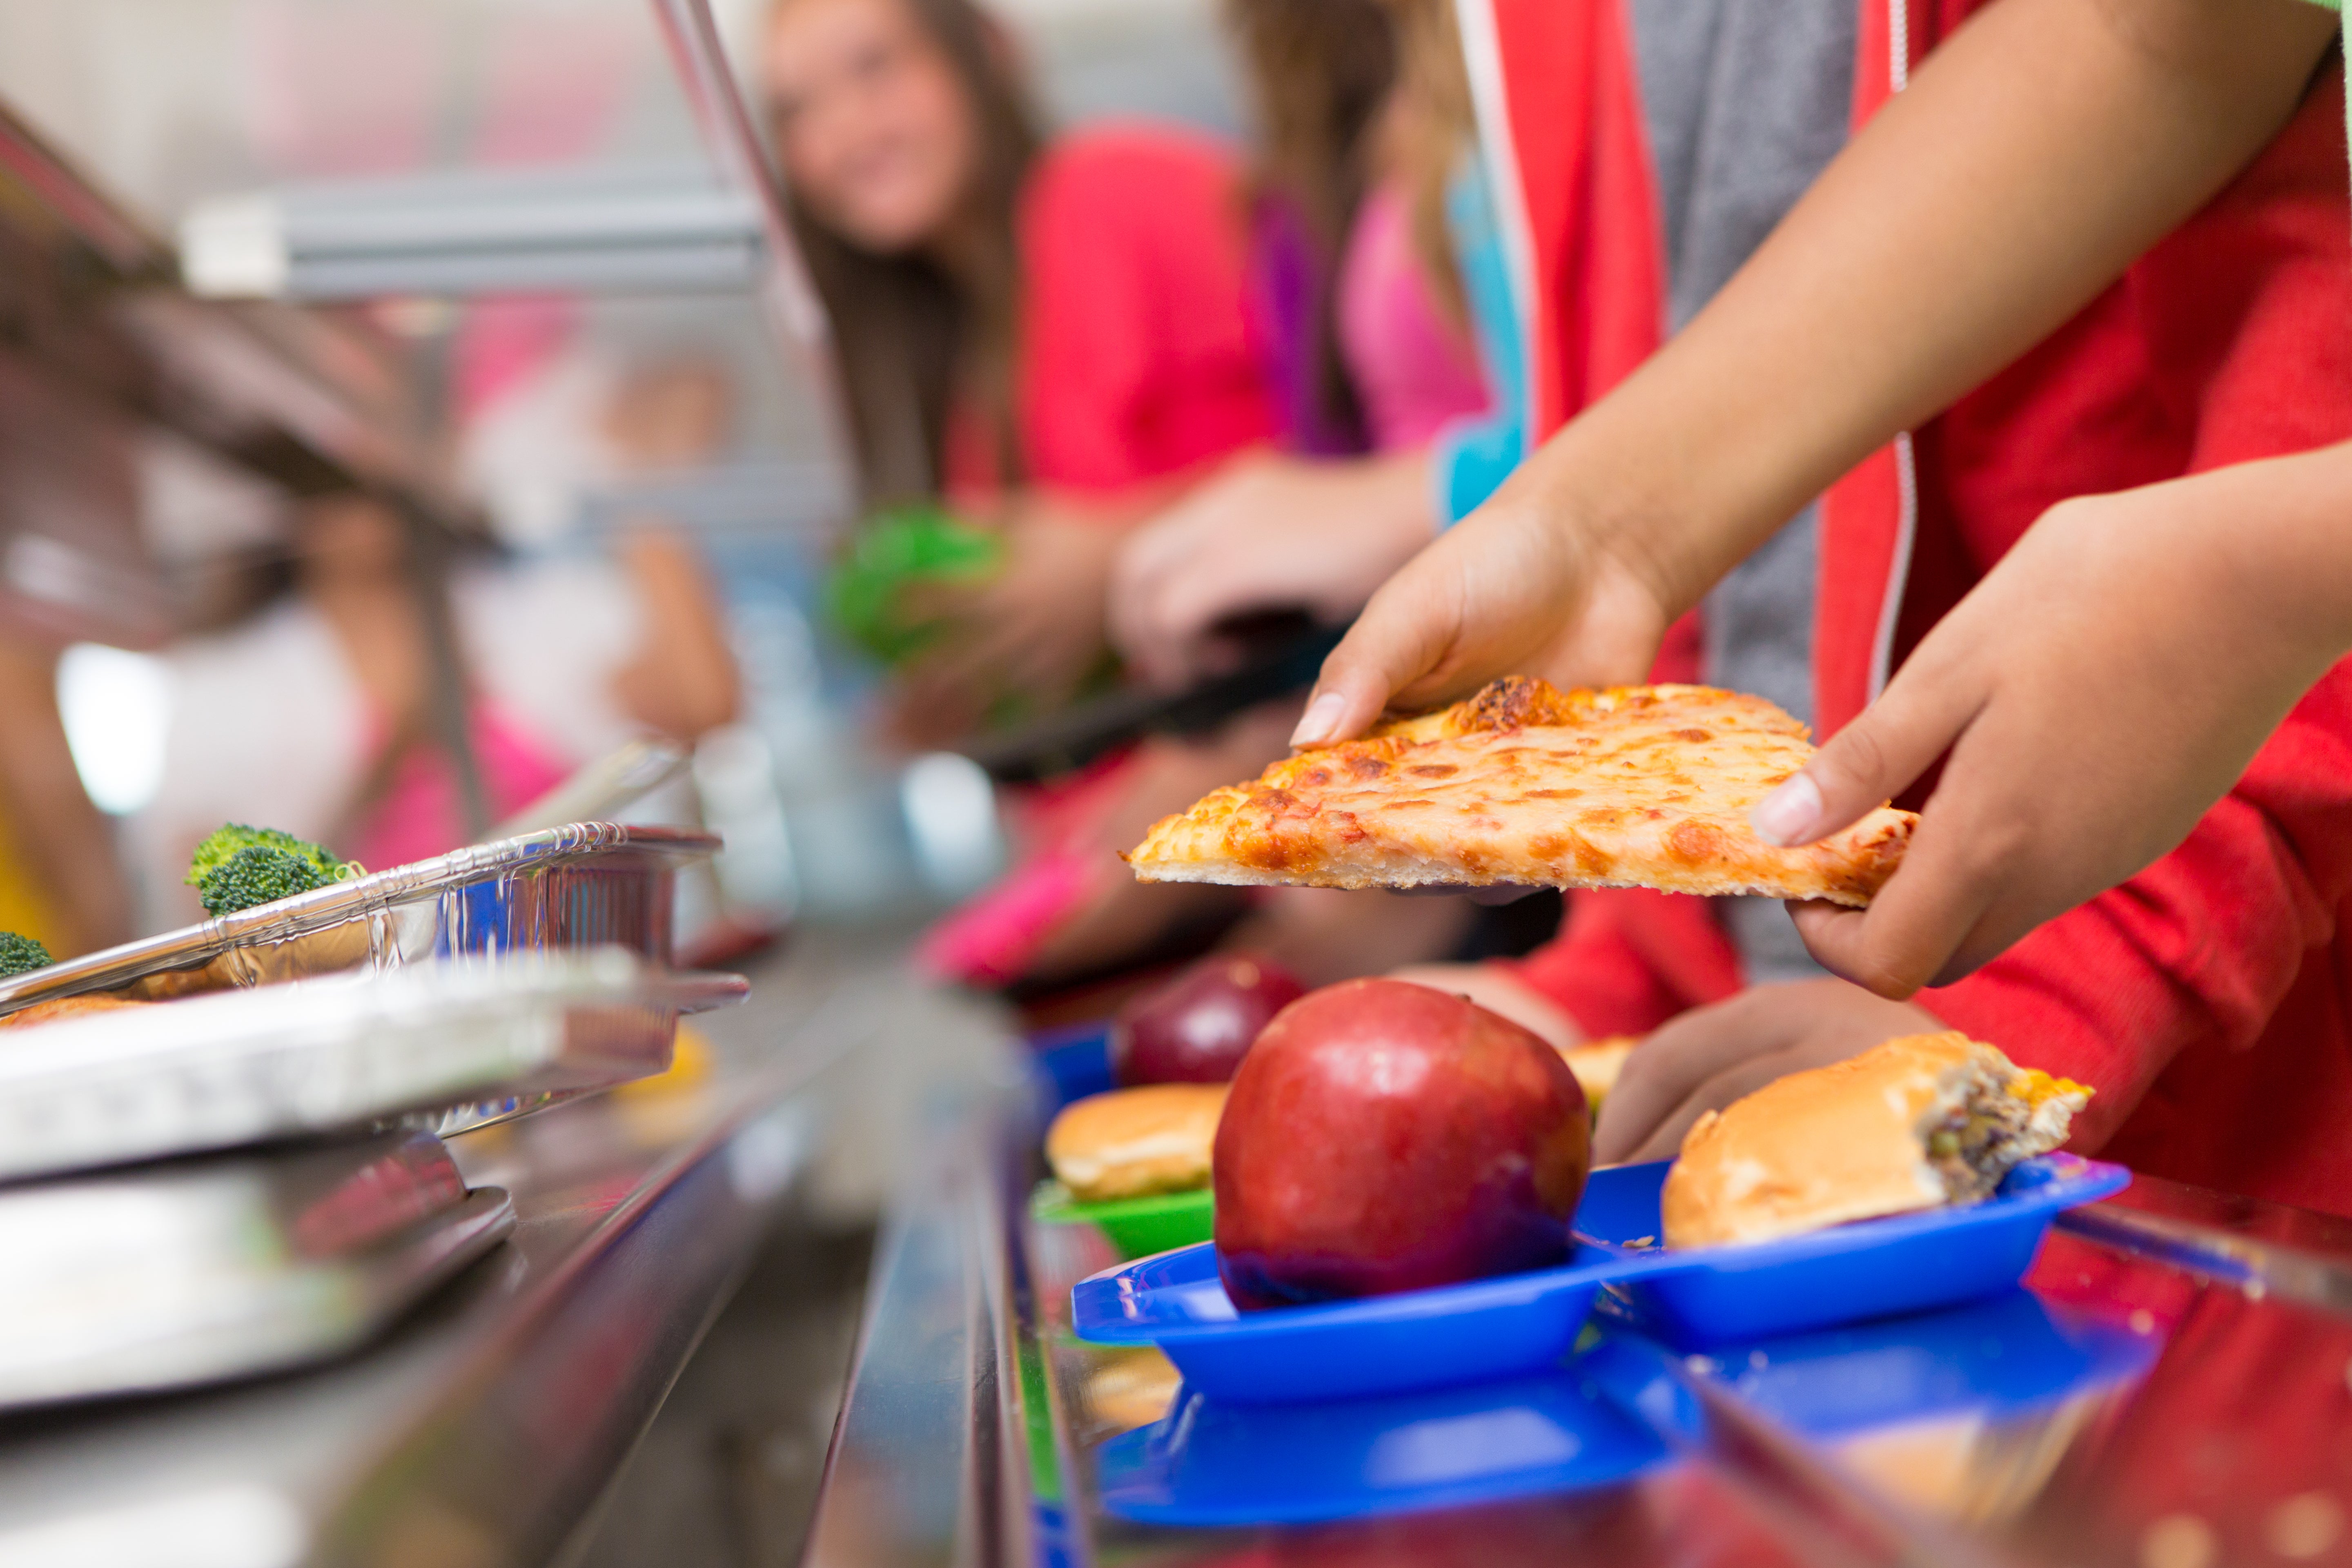 The current government already has a reputation of disregarding the importance of free school meals